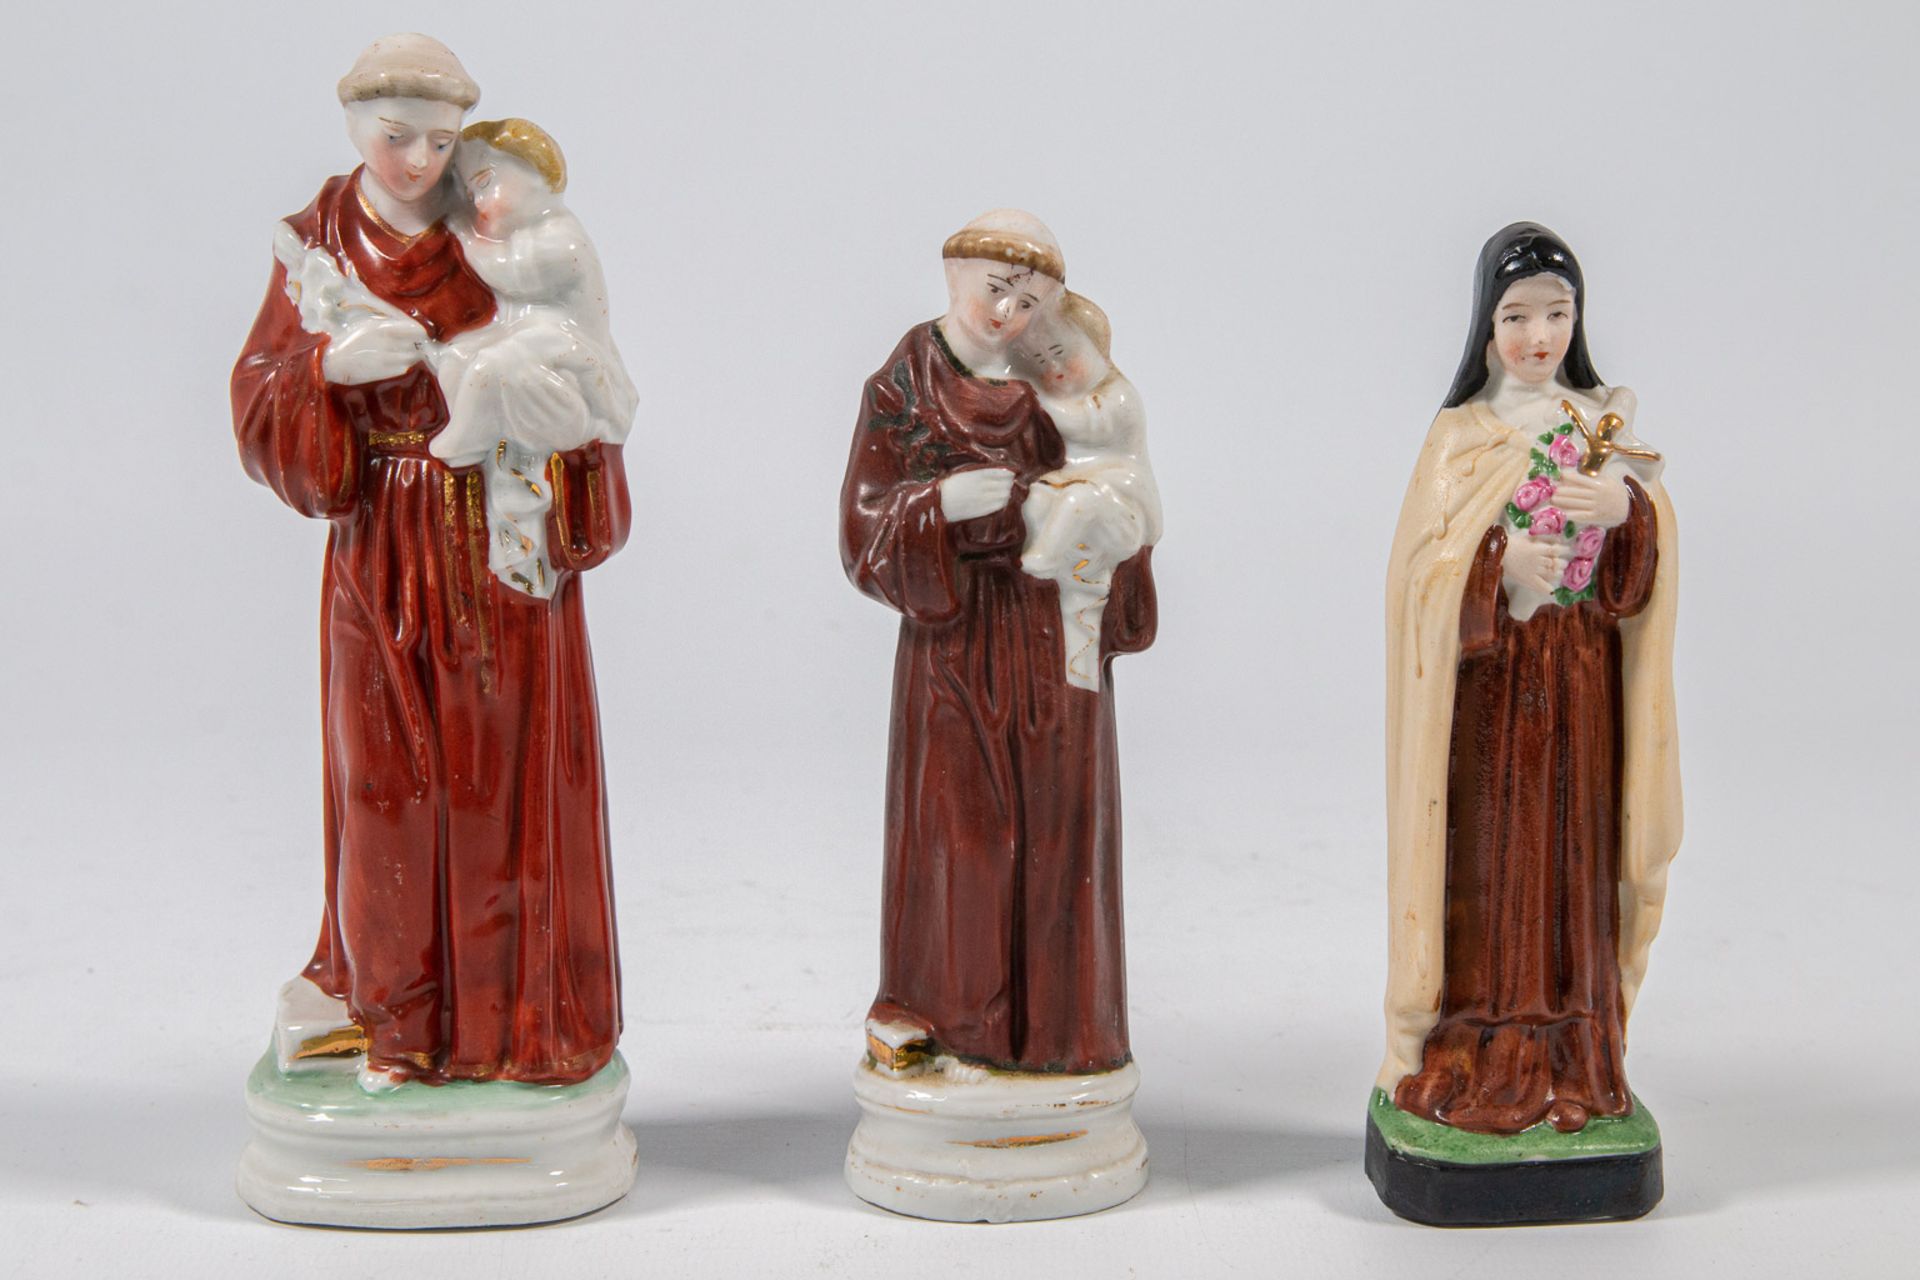 A collection of 11 bisque porcelain holy statues, Mary, Joseph, and Madonna. - Image 46 of 49